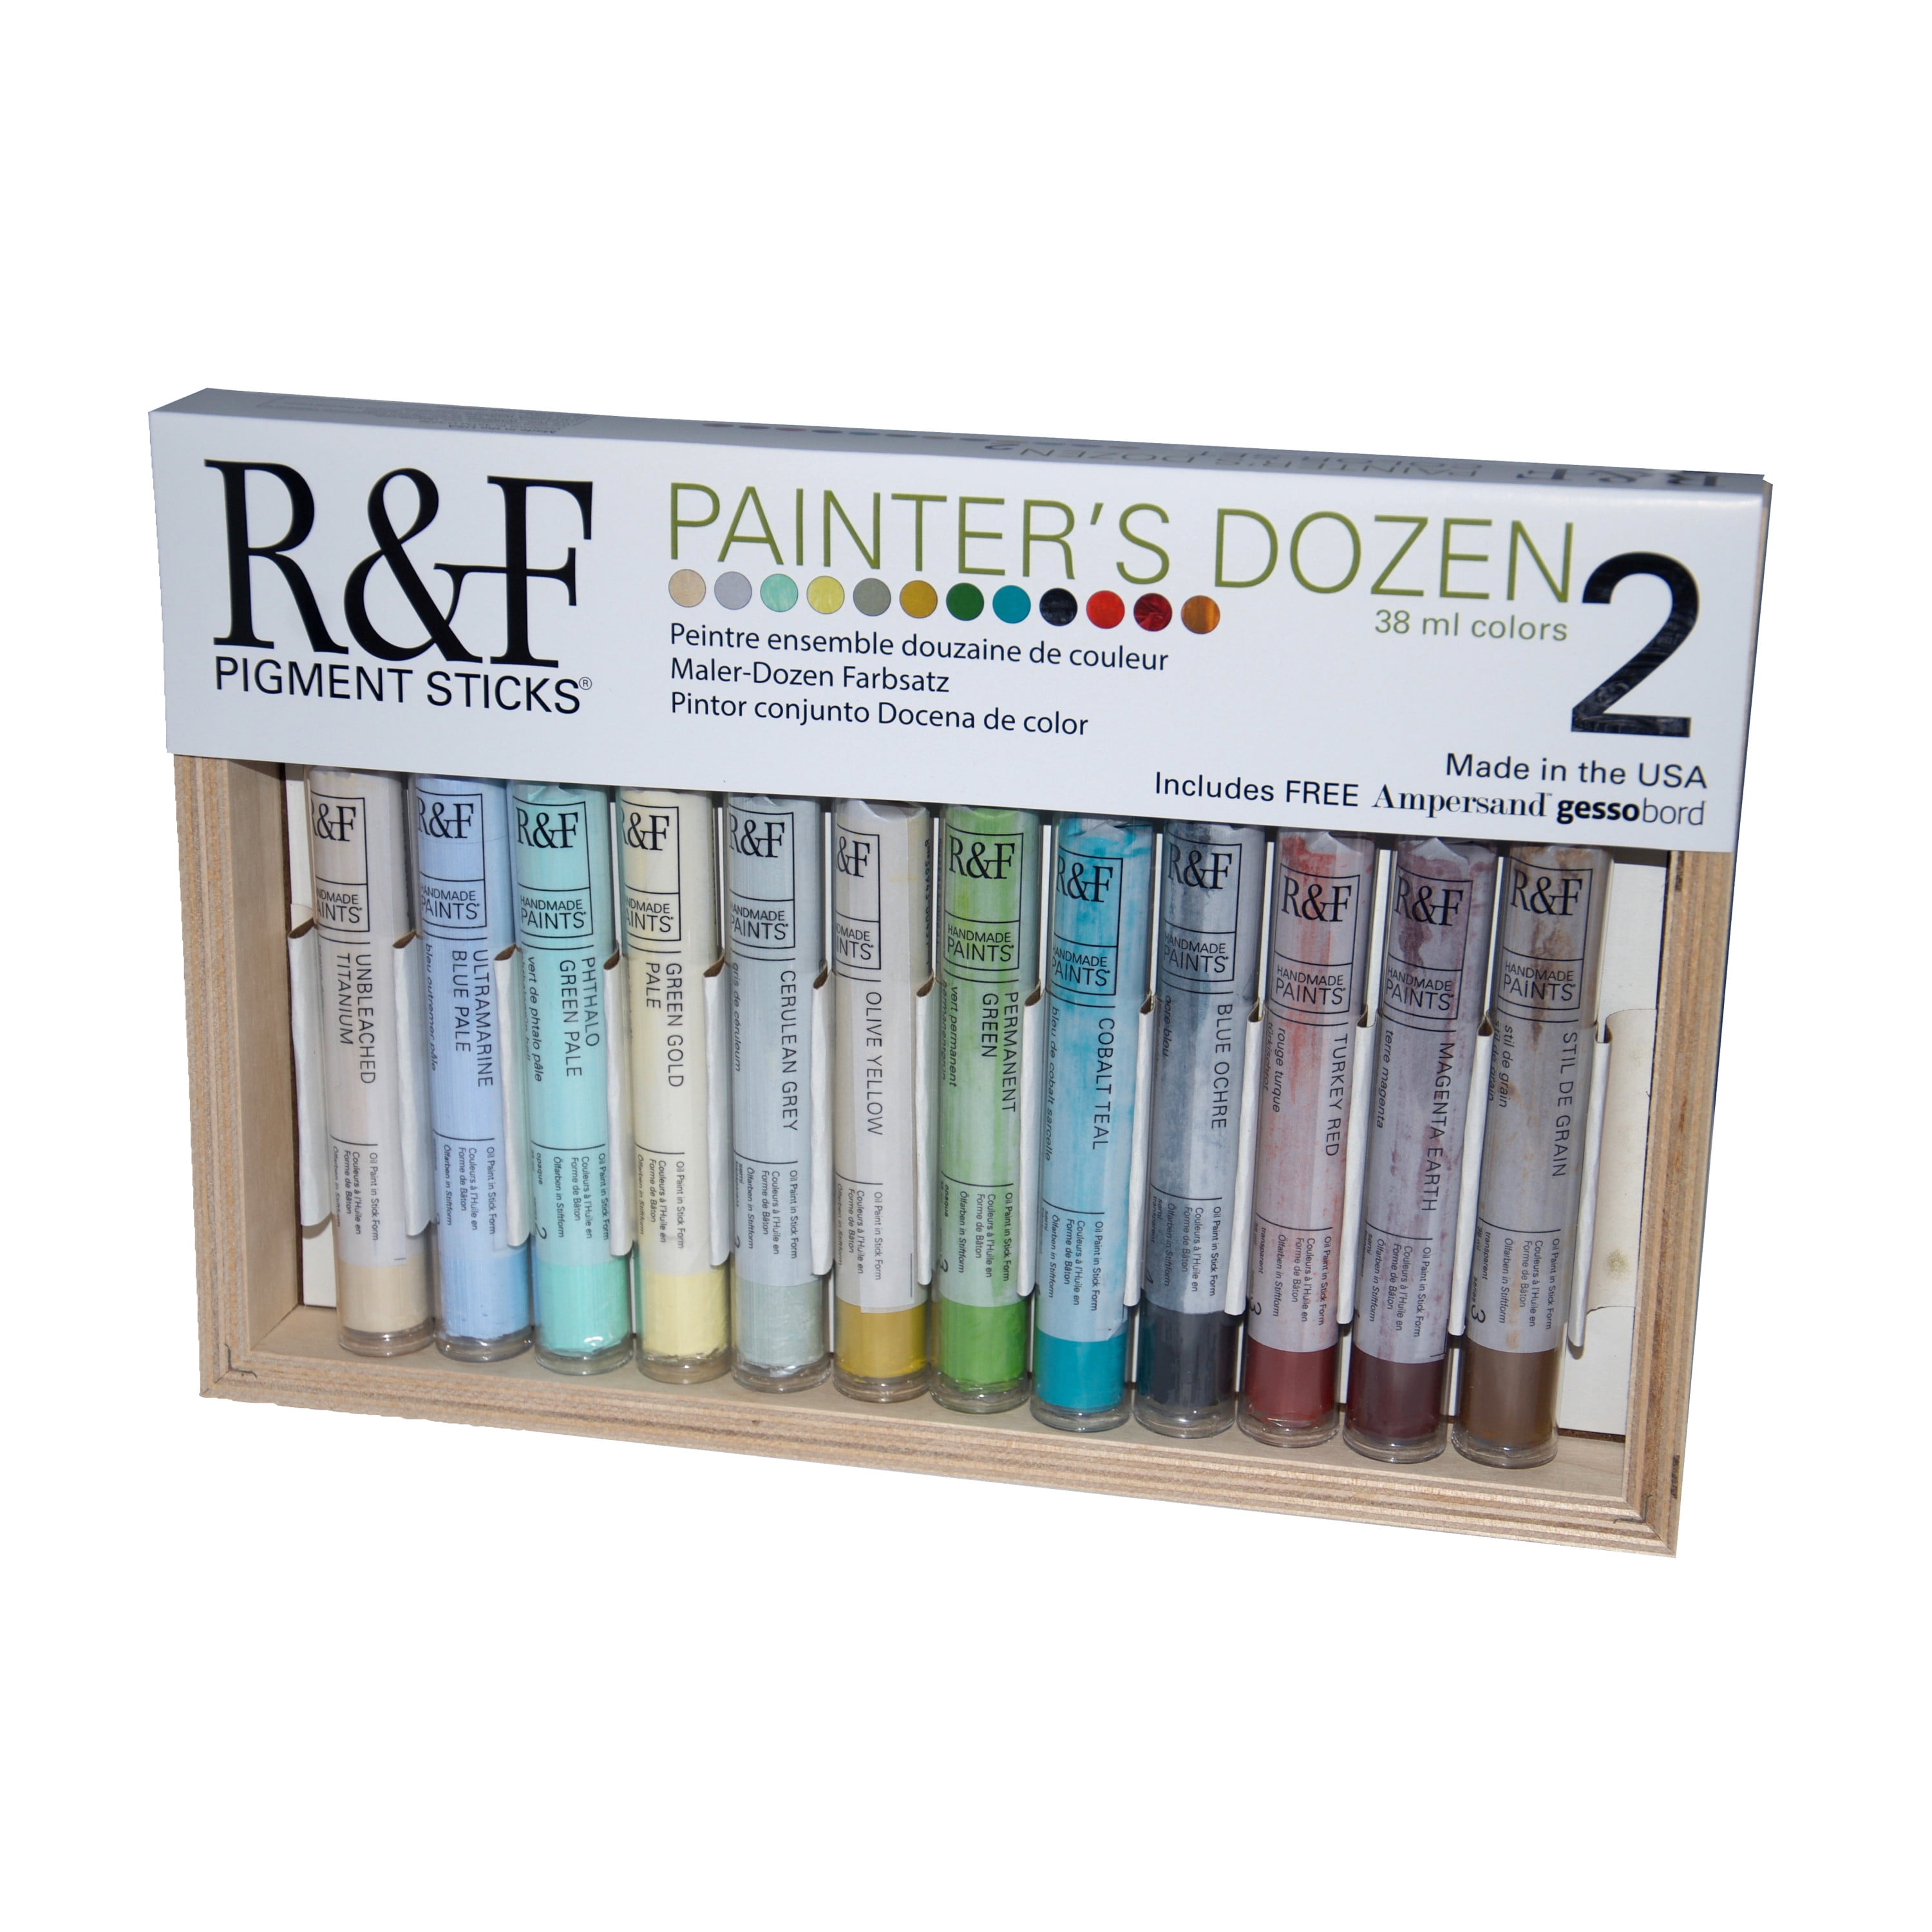 Ask Richard: Drying Times for Pigment Sticks — R&F Handmade Paints